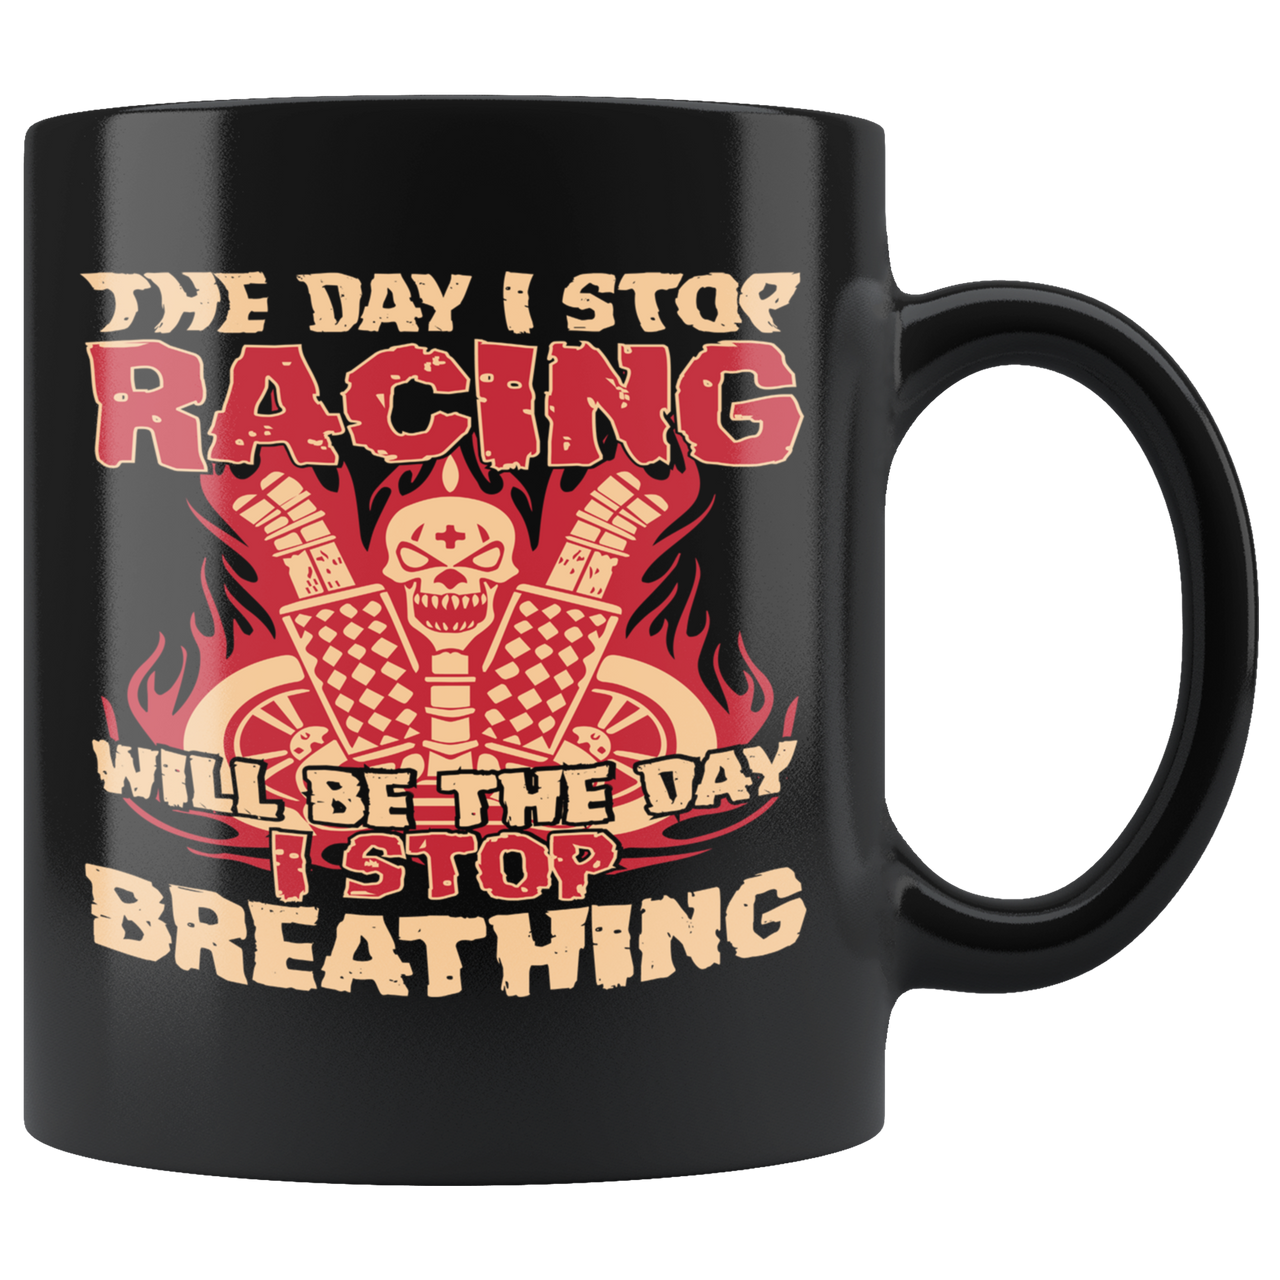 The Day I Stop Racing Will Be The Day I Stop Breathing Mug!